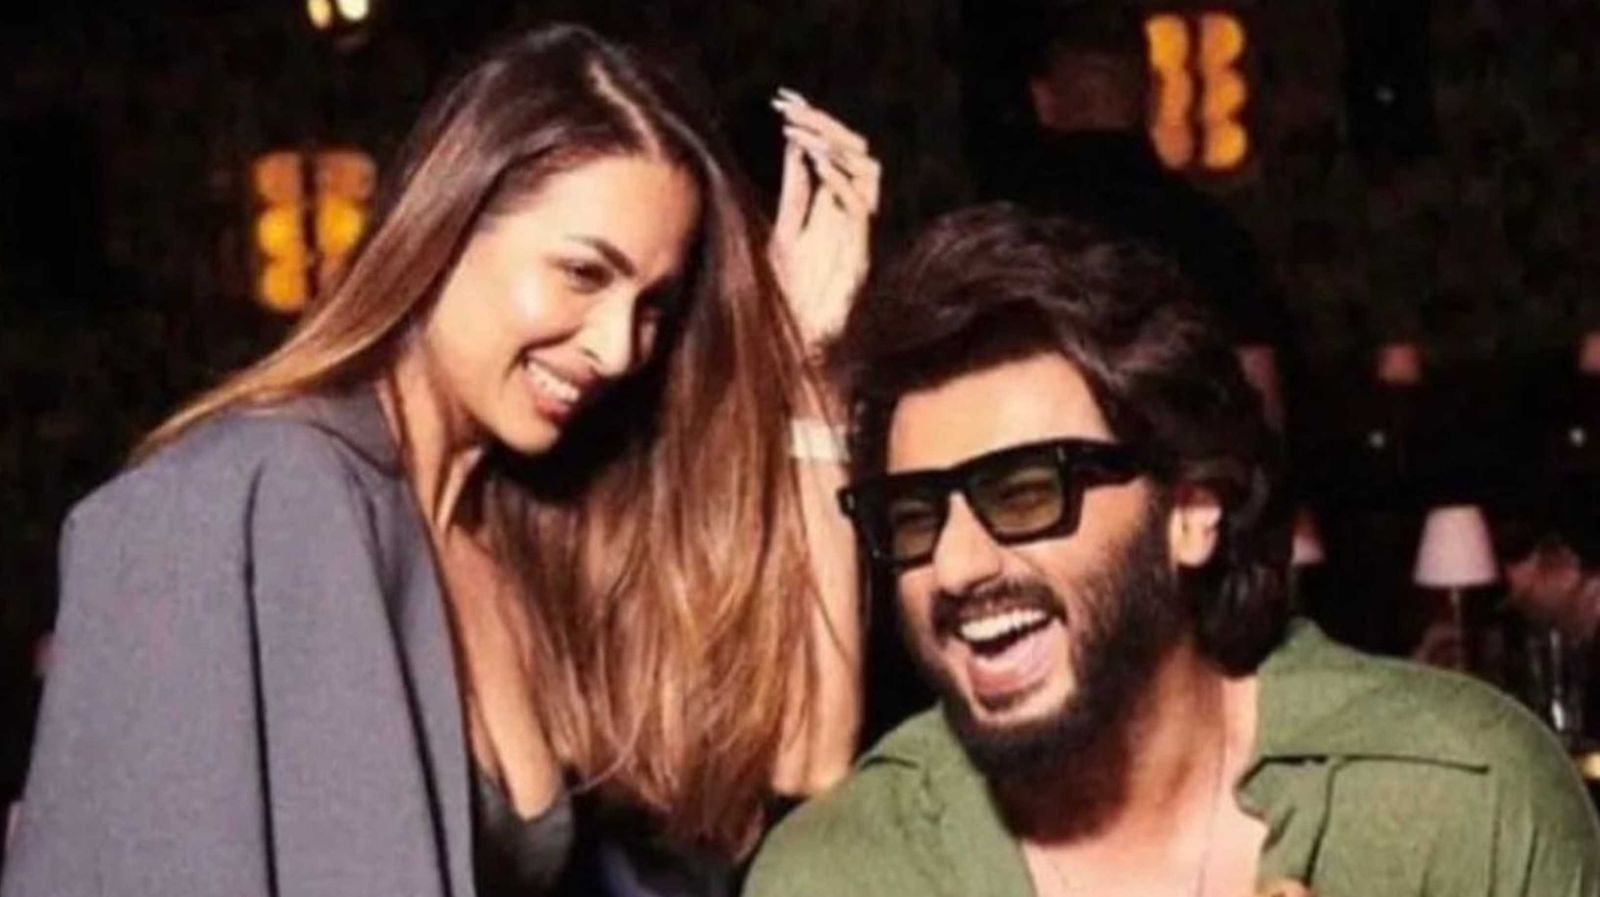 ‘Fact that he is younger keeps me younger’: Malaika Arora talks about enjoying pre-honeymoon phase with Arjun Kapoor